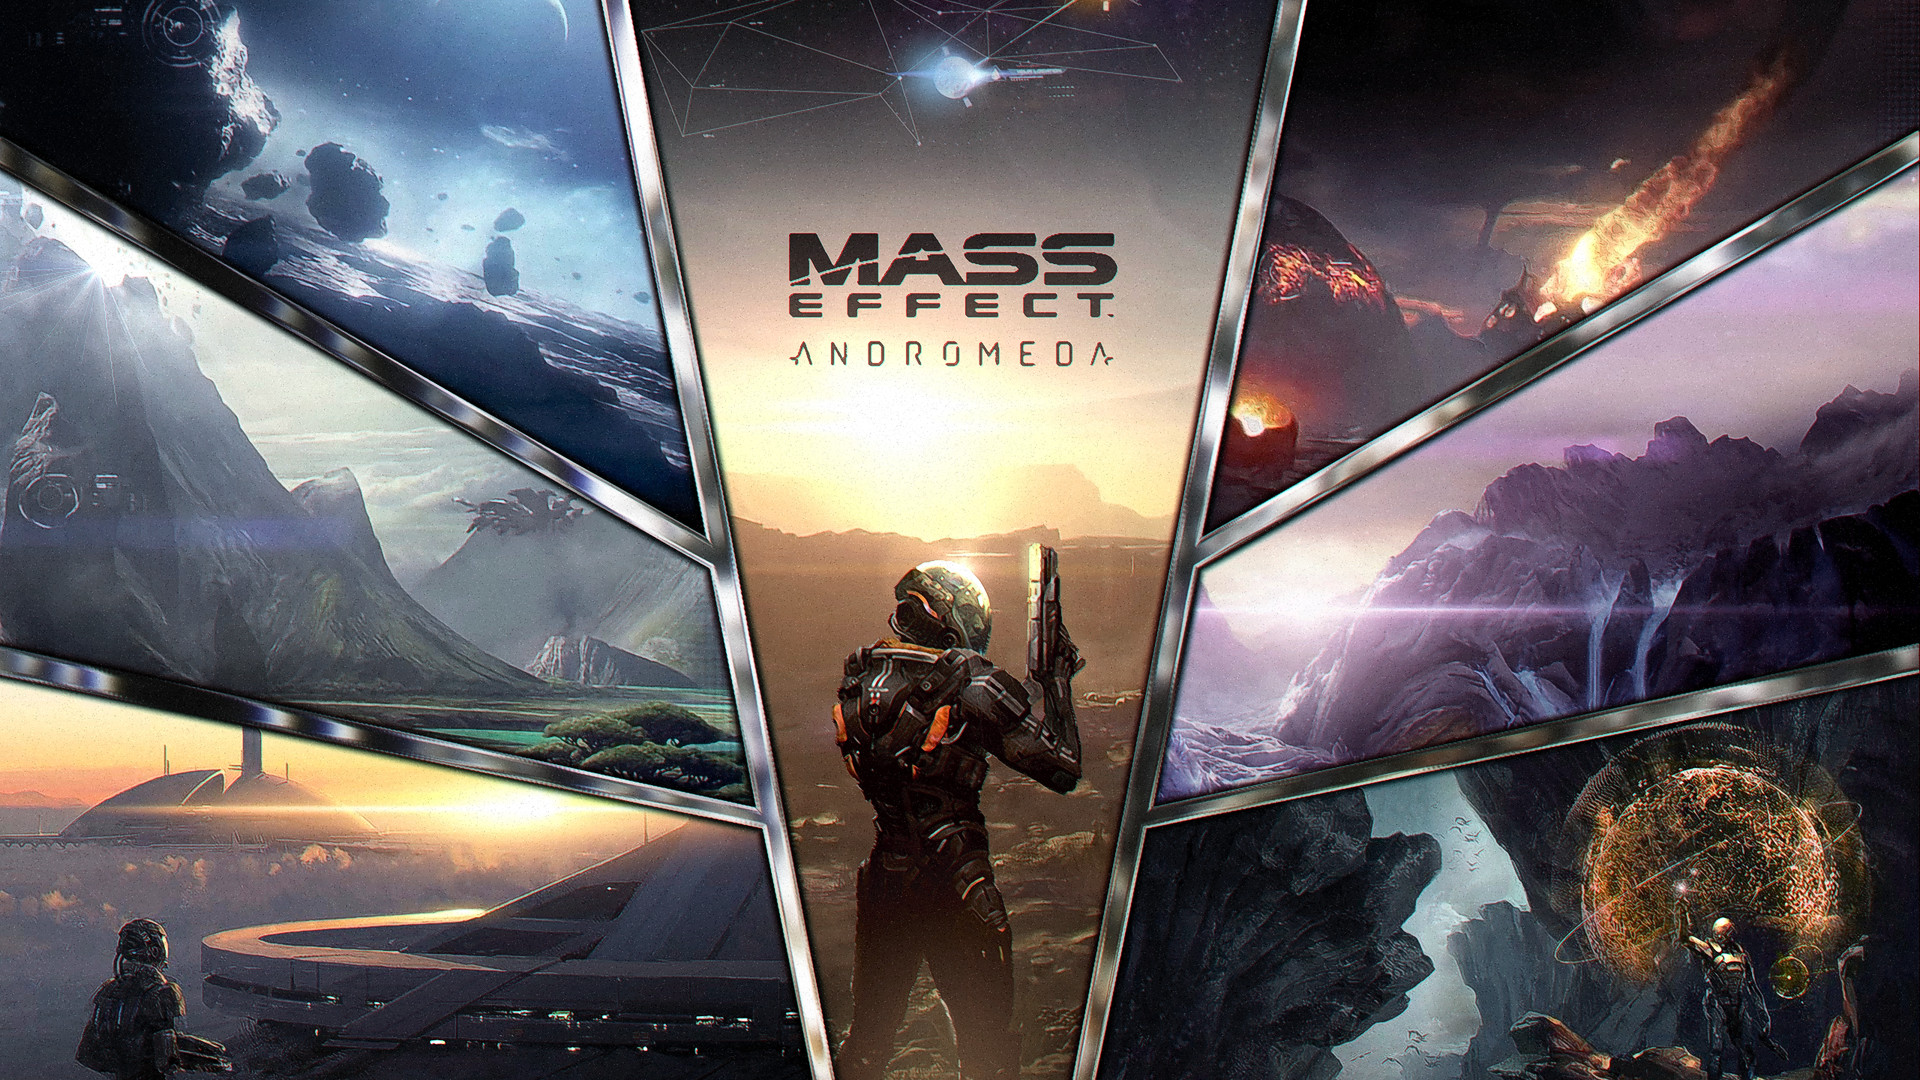 1920x1080 BioWare is bringing out the big guns prior to their official trailer launch  of their latest Mass Effect adventure: Andromeda. Today the developers  behind ...